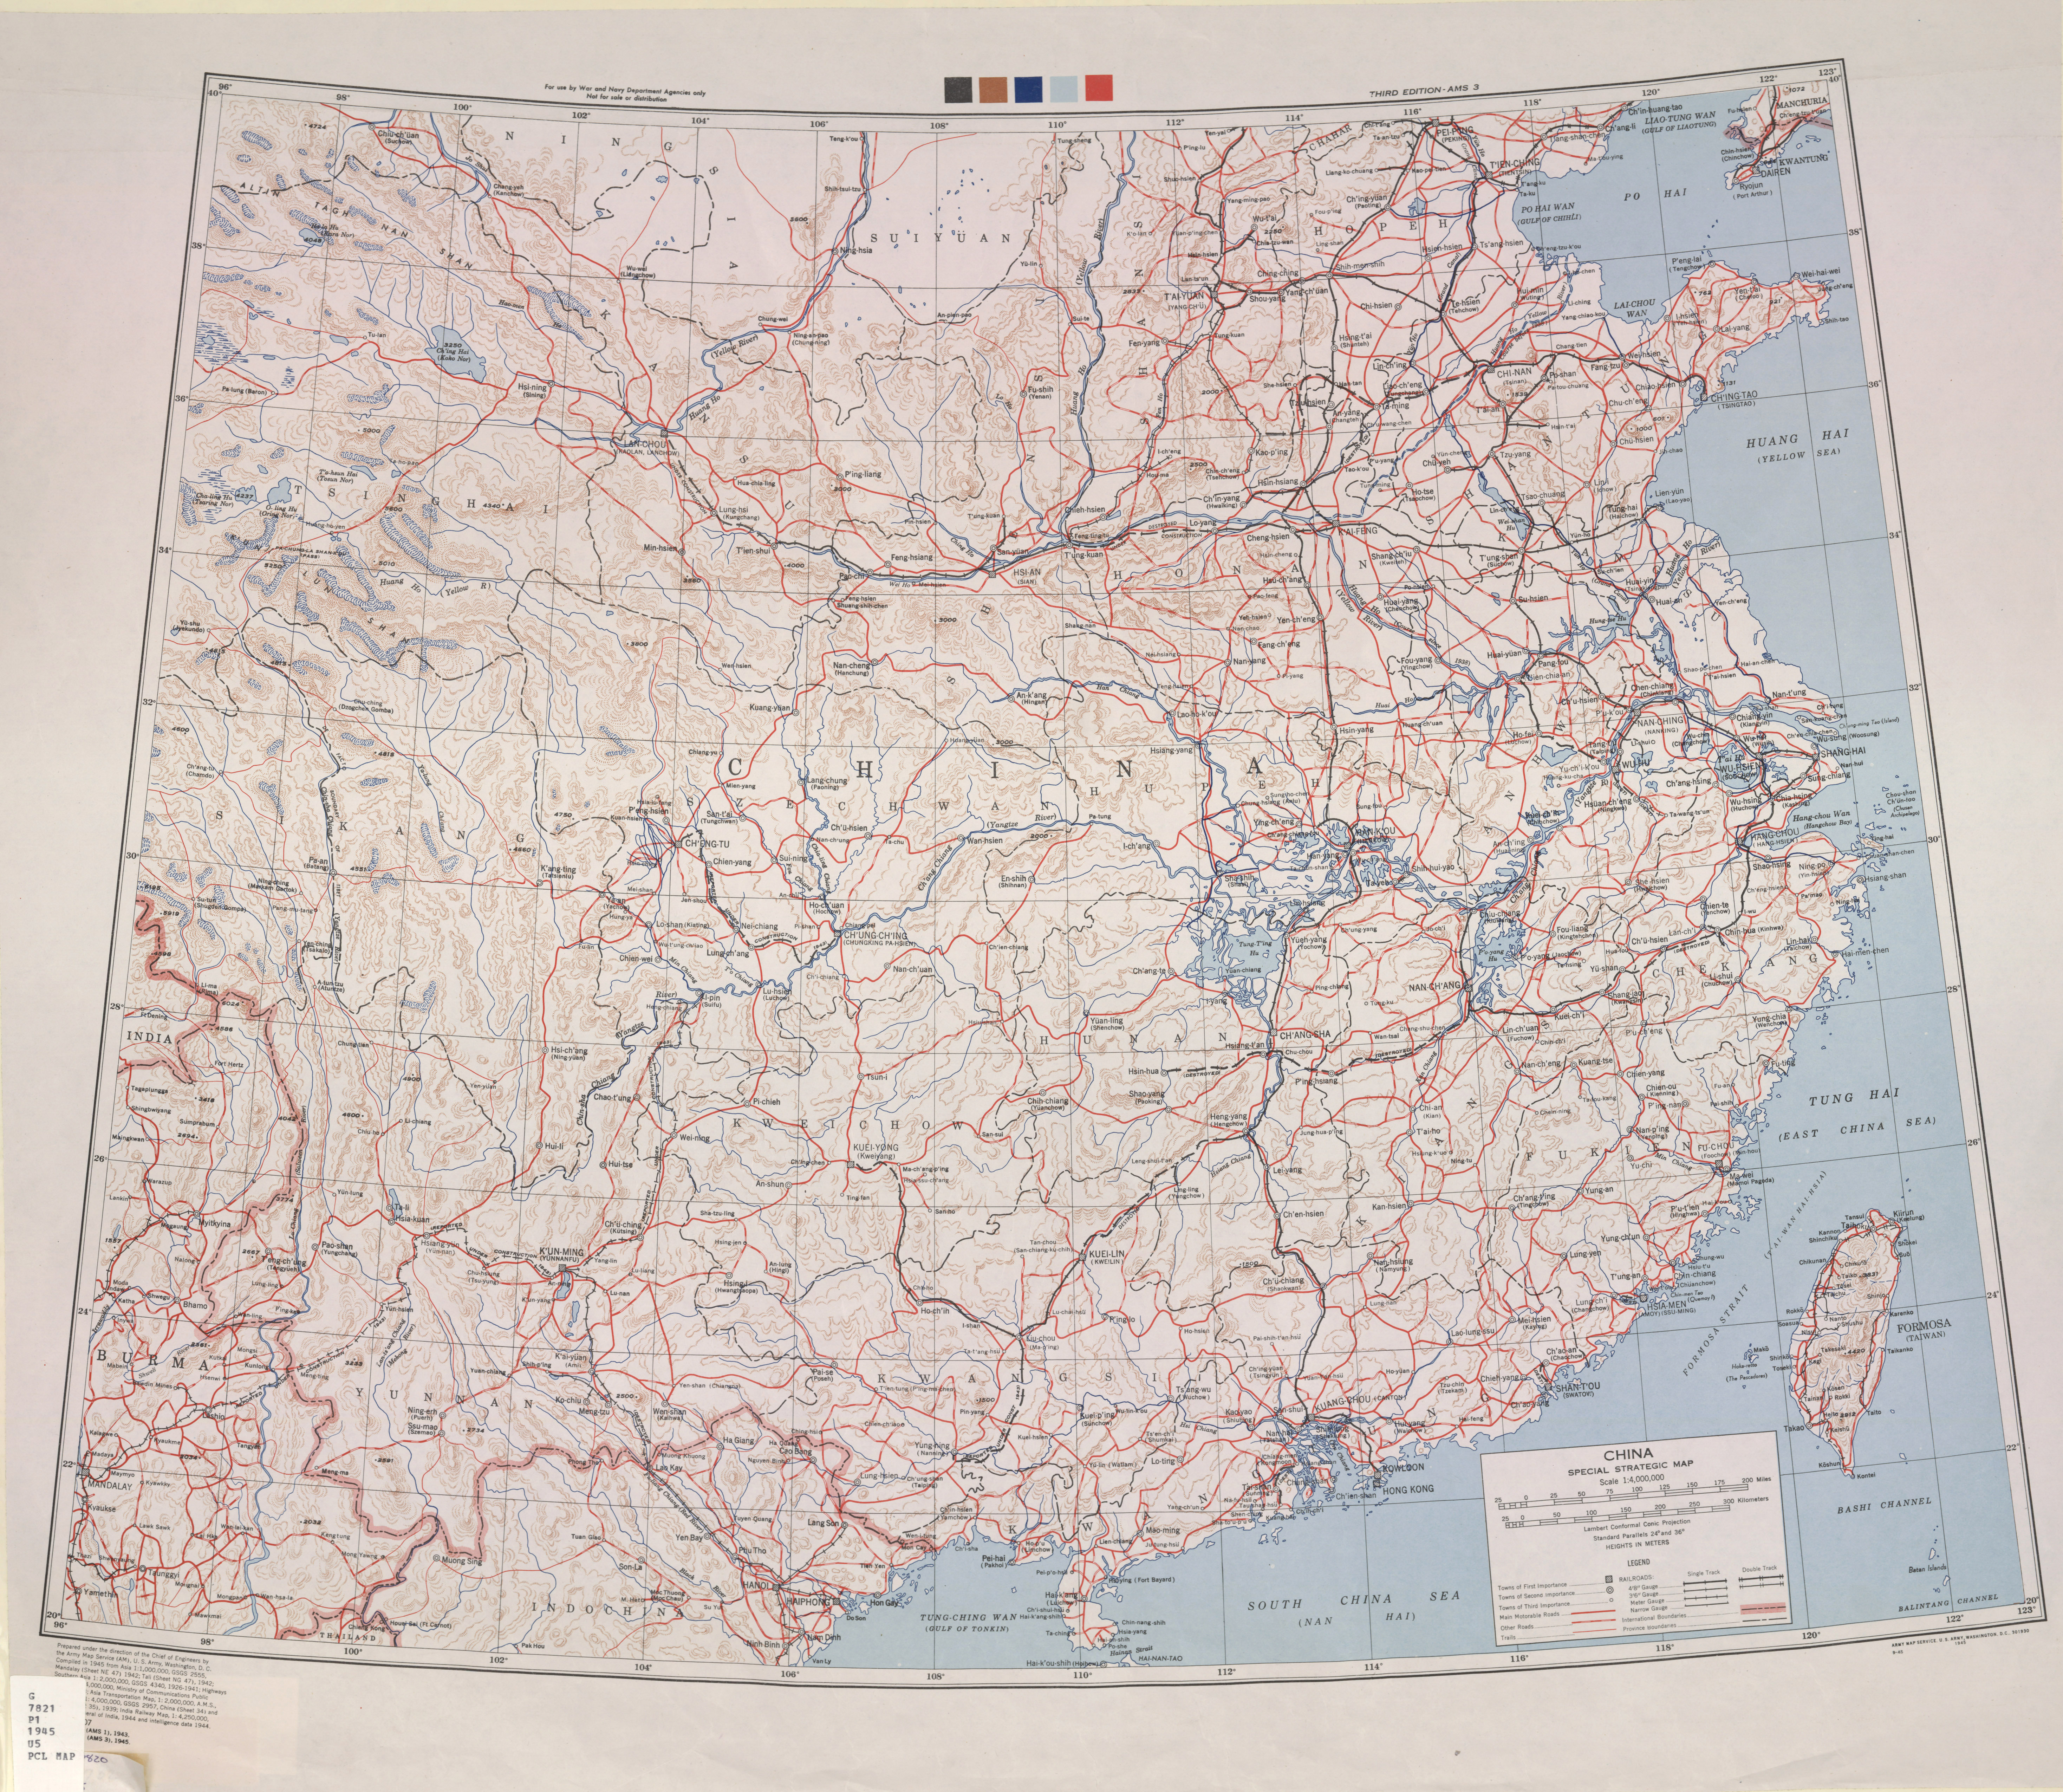 China Historical Maps - Perry-Castañeda Map Collection - UT 